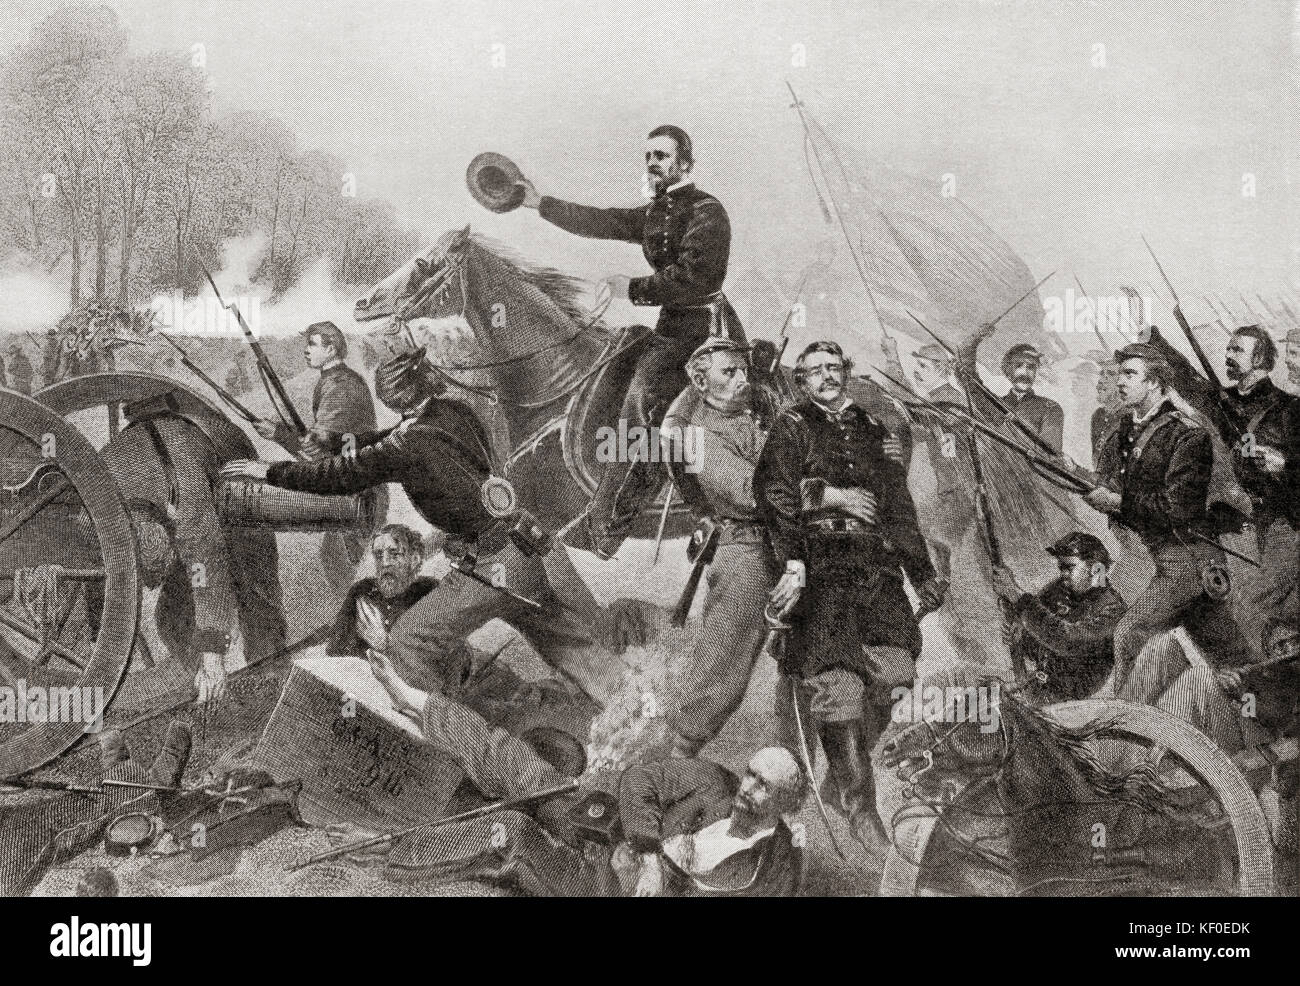 The Battle of Spotsylvania Court House, aka the Battle of Spotsylvania or Spottsylvania.  Second major battle in Lt. Gen. Ulysses S. Grant's 1864 Overland Campaign of the American Civil War.  From Hutchinson's History of the Nations, published 1915. Stock Photo